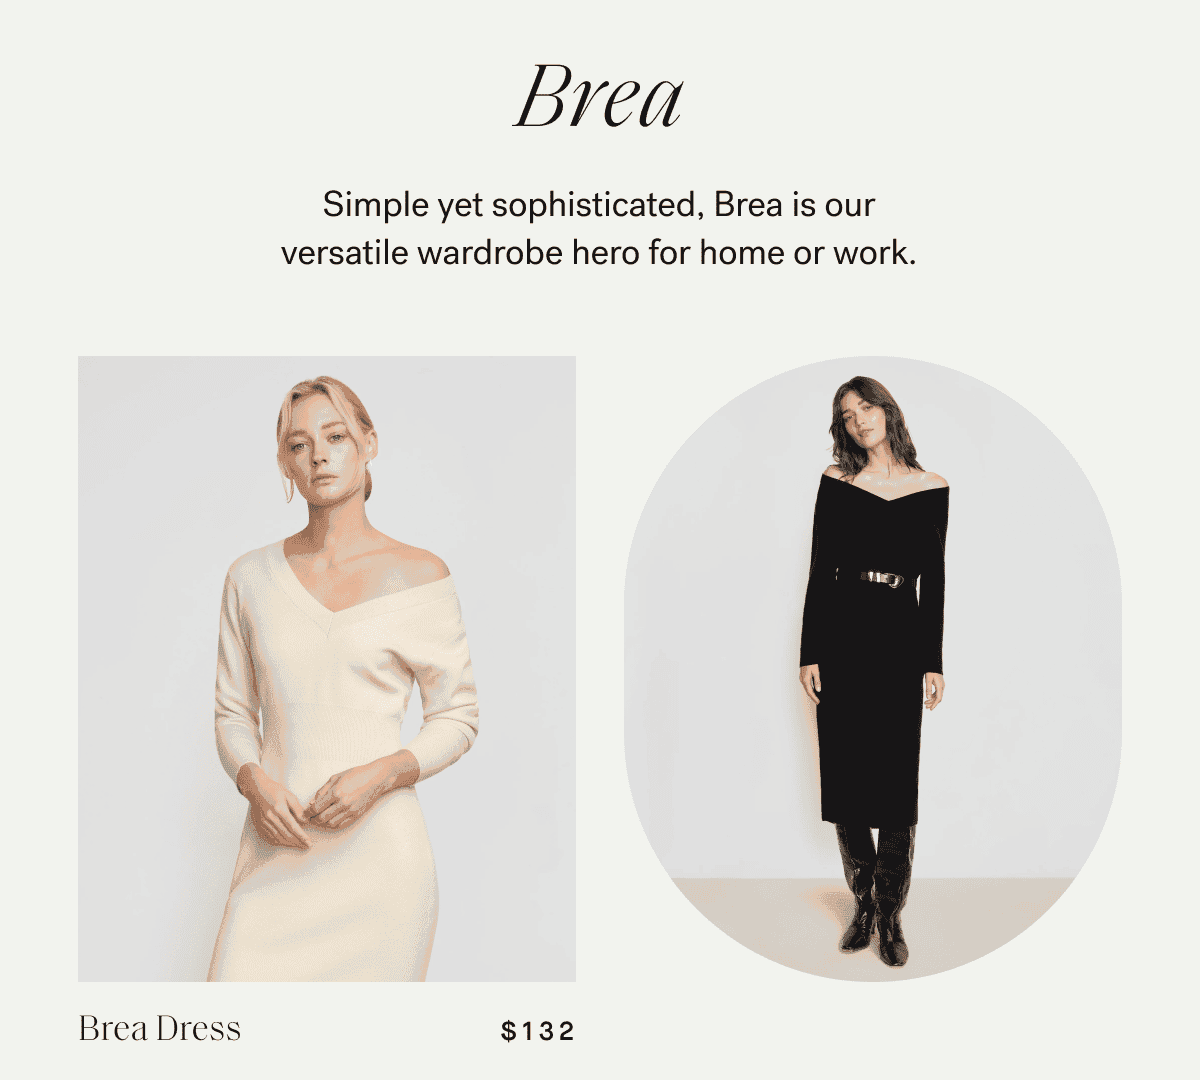 Brea —\xa0Simple yet sophisticated, Brea is our versatile wardrobe hero for home or work.